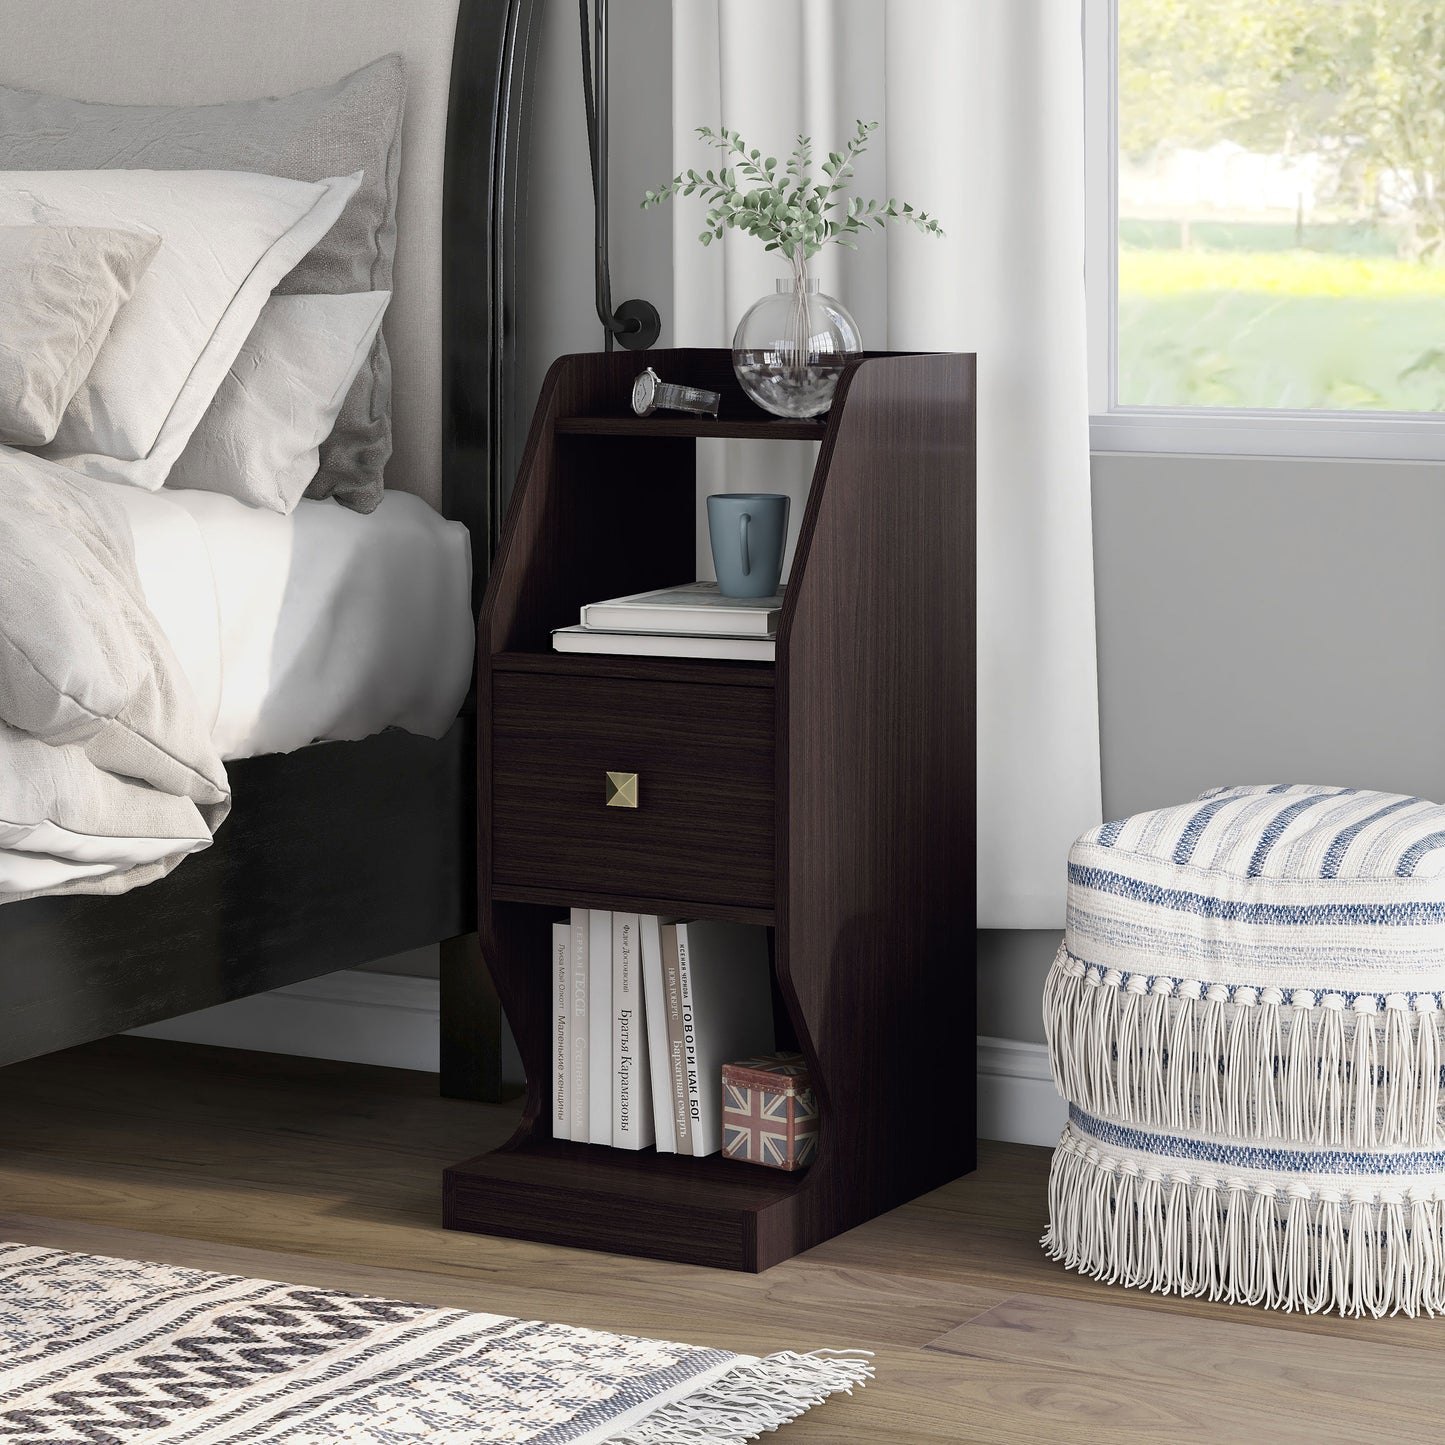 Left angled transitional espresso tiered one-drawer nightstand in a bedroom with accessories